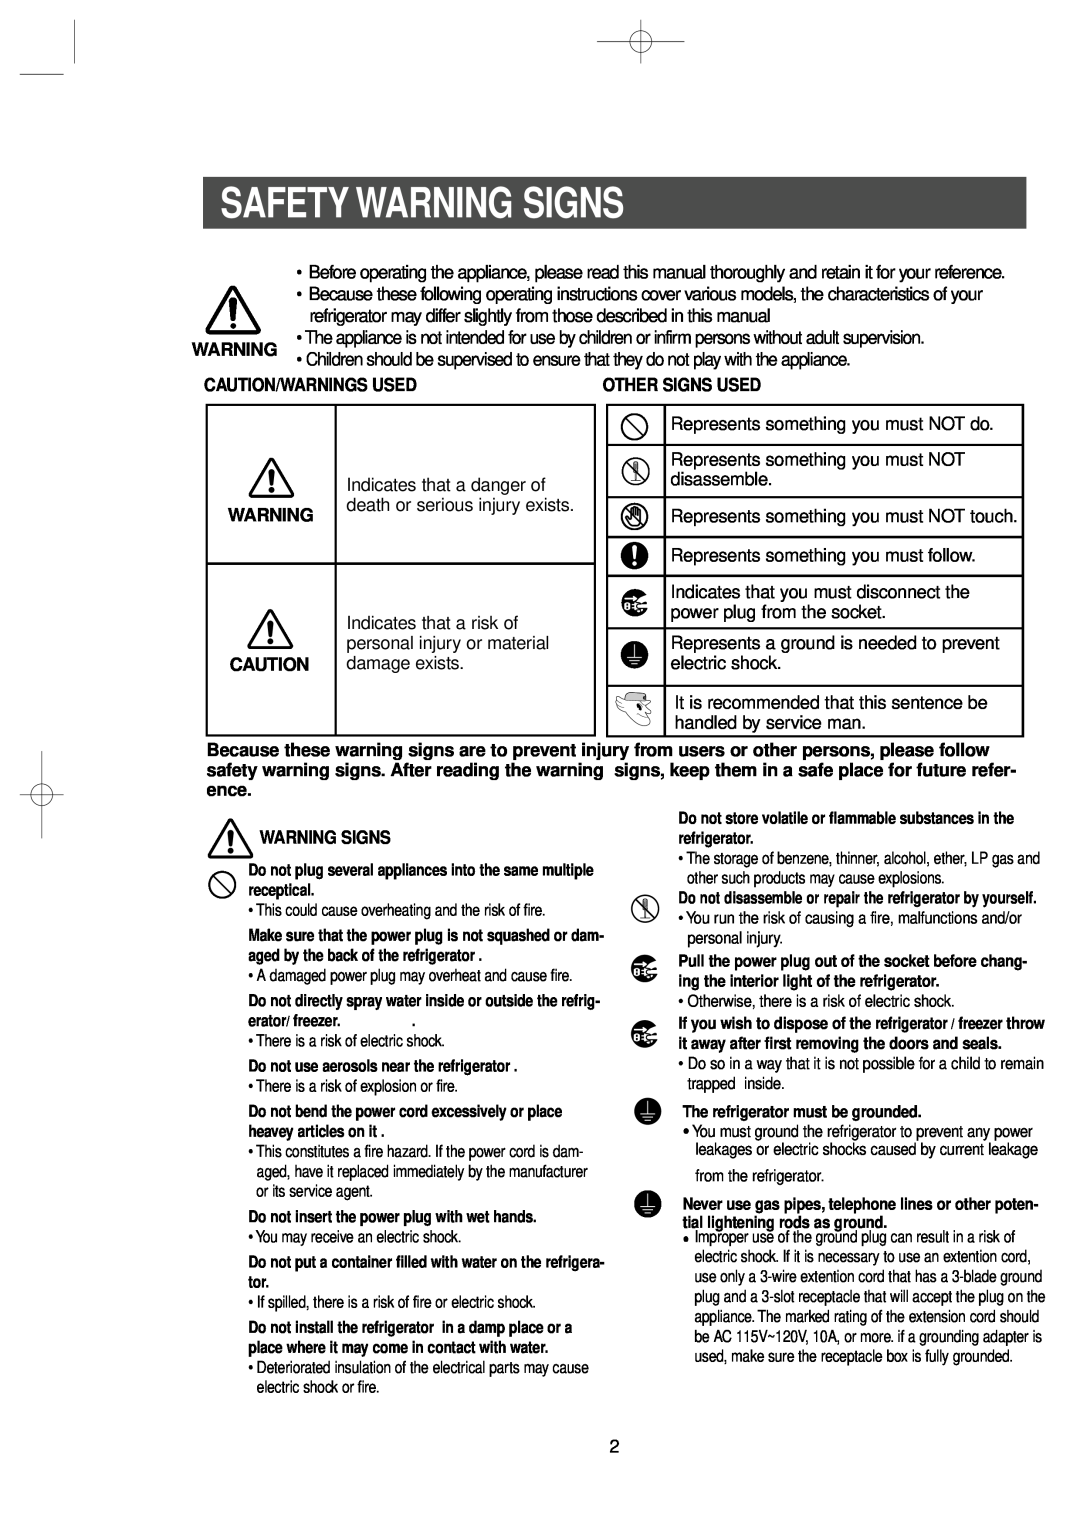 Samsung RS2555BB, RS2577SL Safety Warning Signs, refrigerator may differ slightly from those described in this manual 